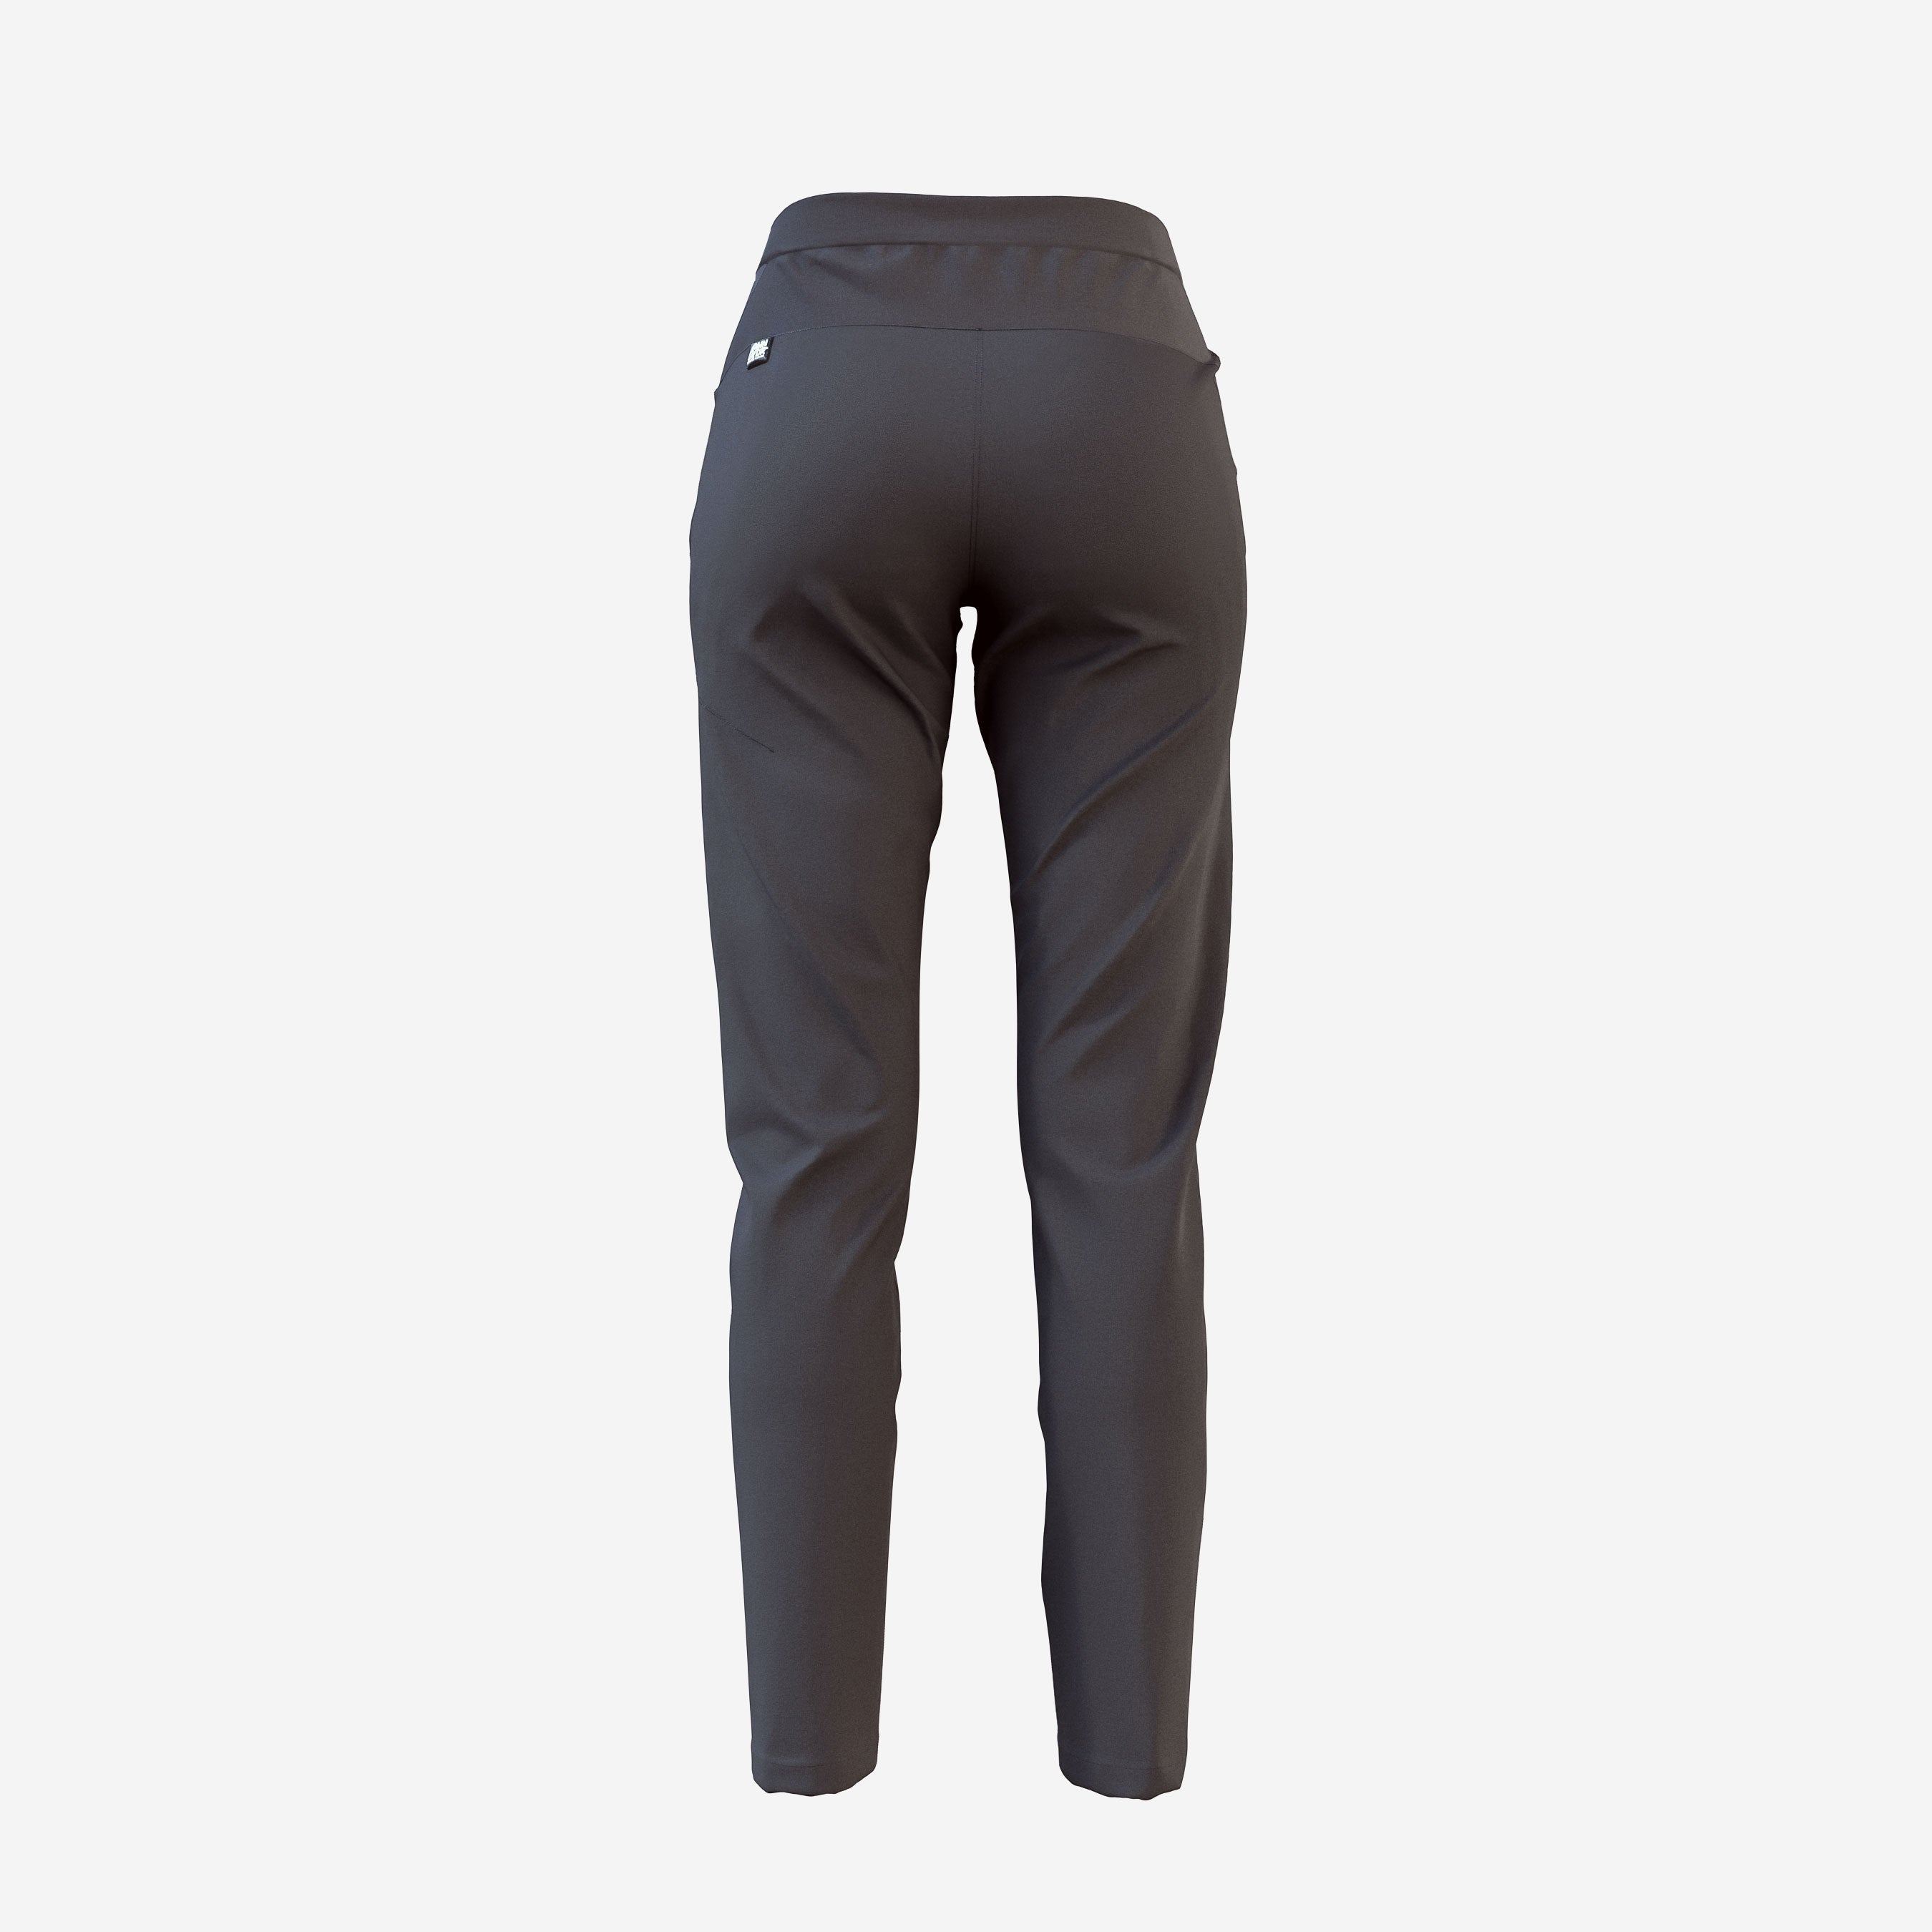 Diffuse Women's Pant